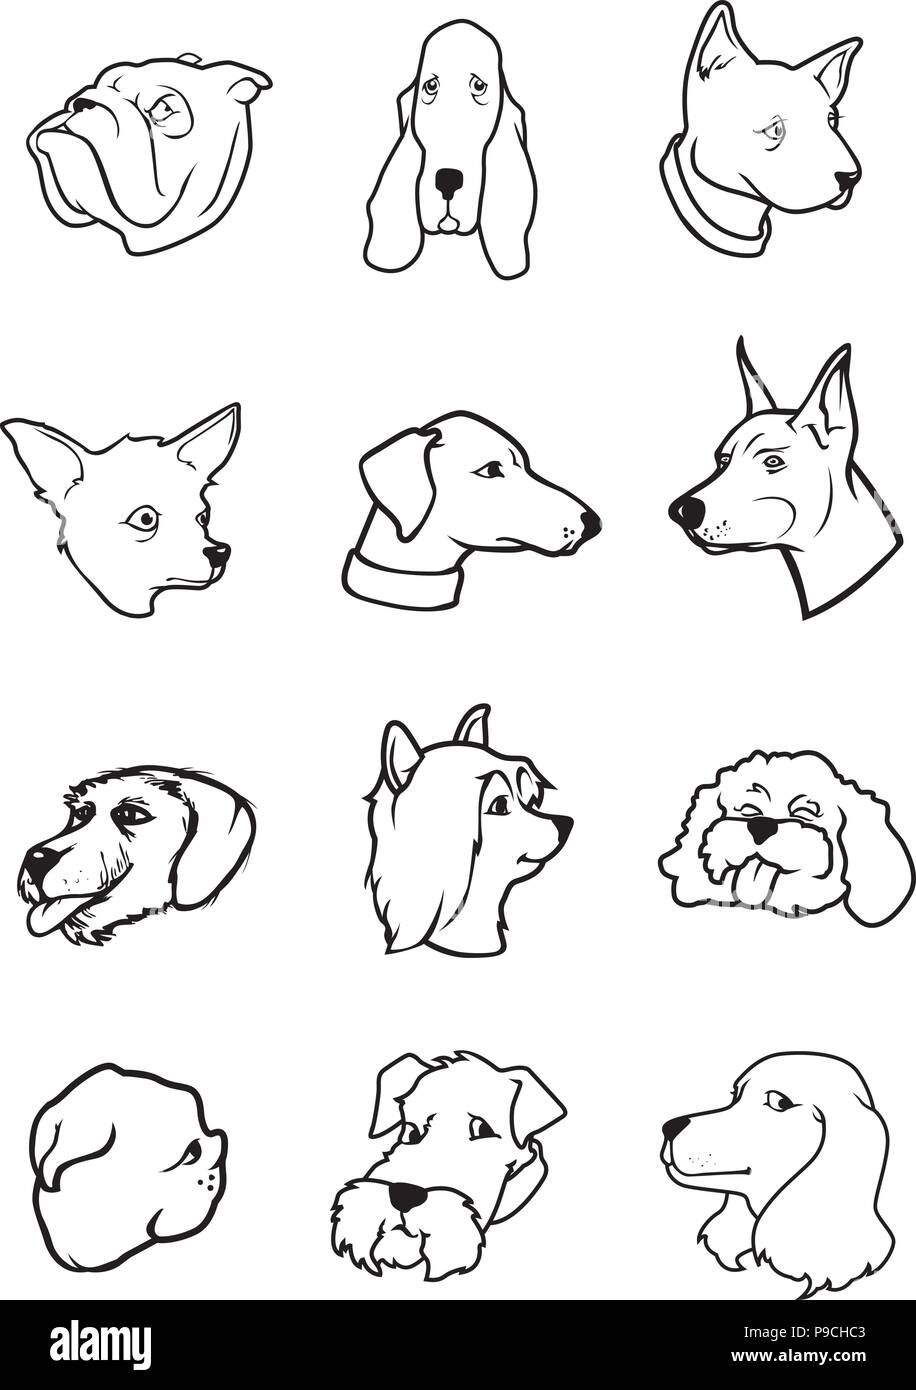 cartoon vector illustration of black and white dog faces Stock Vector